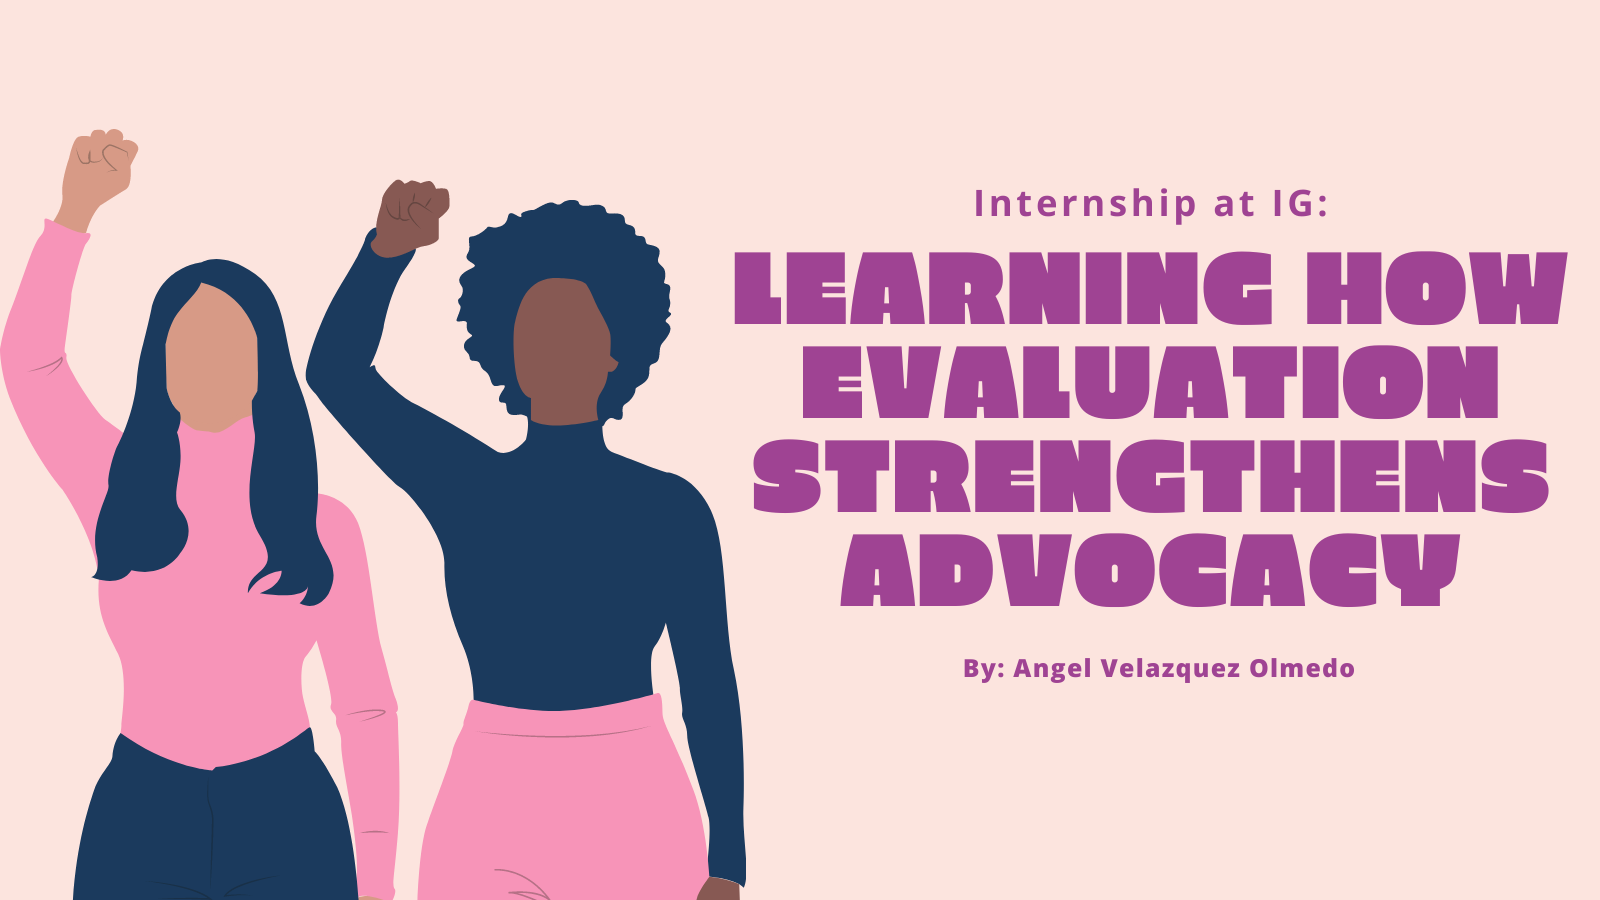 An image graphic that features two women raising their fists and features the article title: "Internship at IG: Learning how evaluation strengthens advocacy"